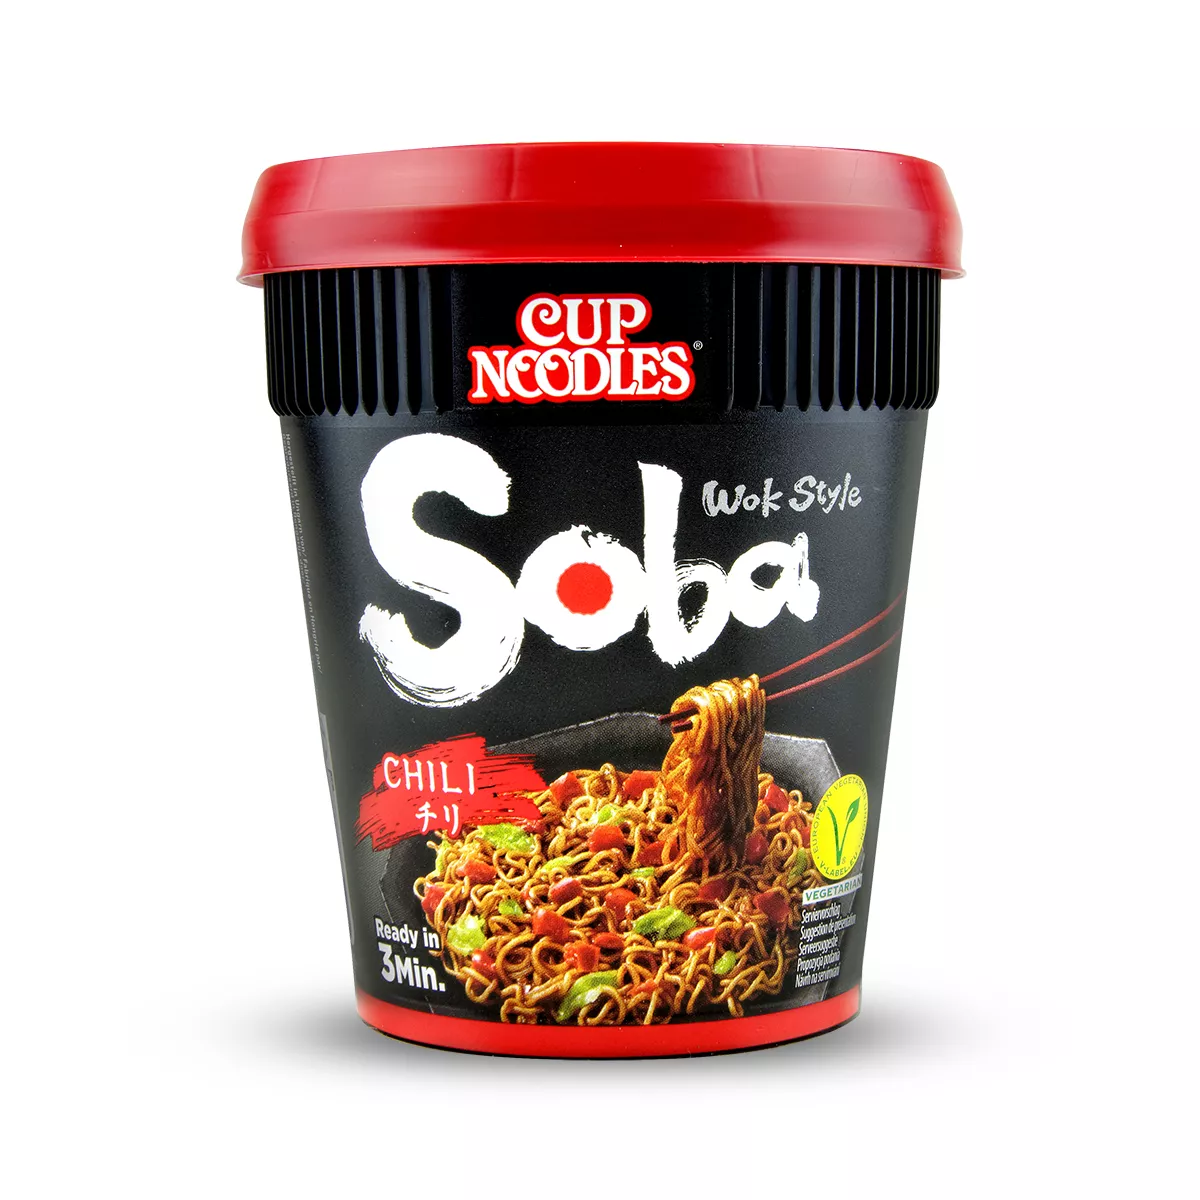 Taitei instant soba cu chilli NISSIN CUP 92g, [],asianfood.ro